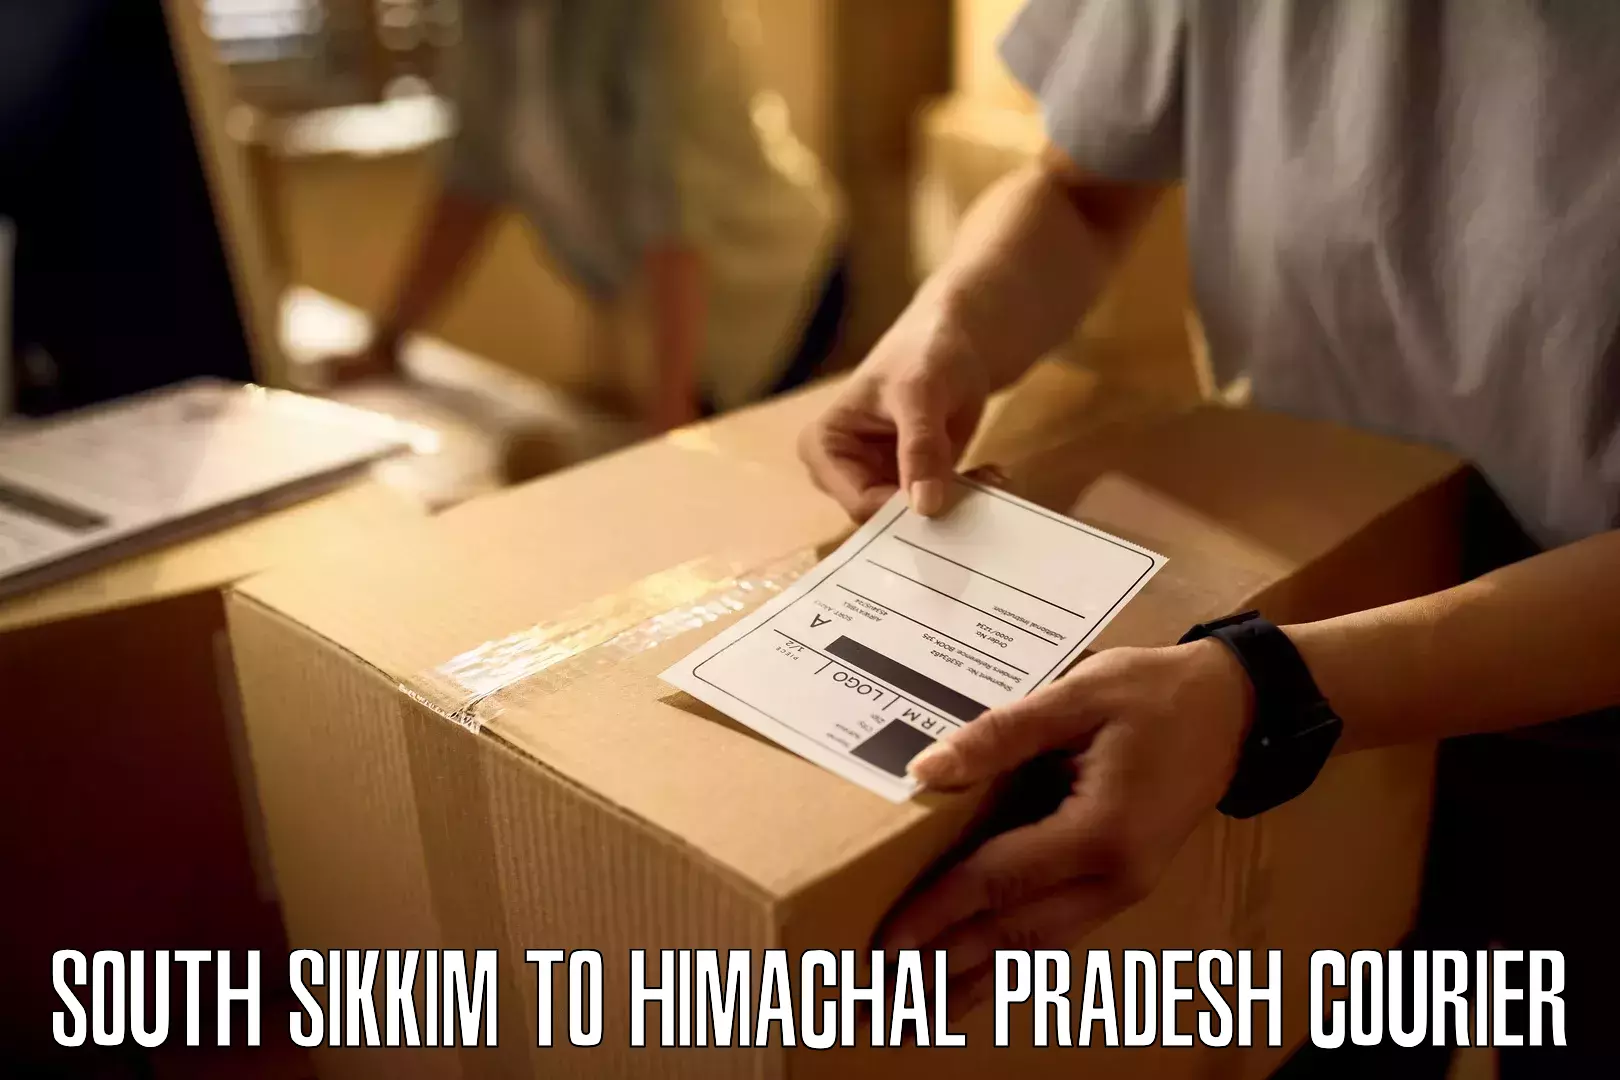 24/7 courier service in South Sikkim to Dharamshala